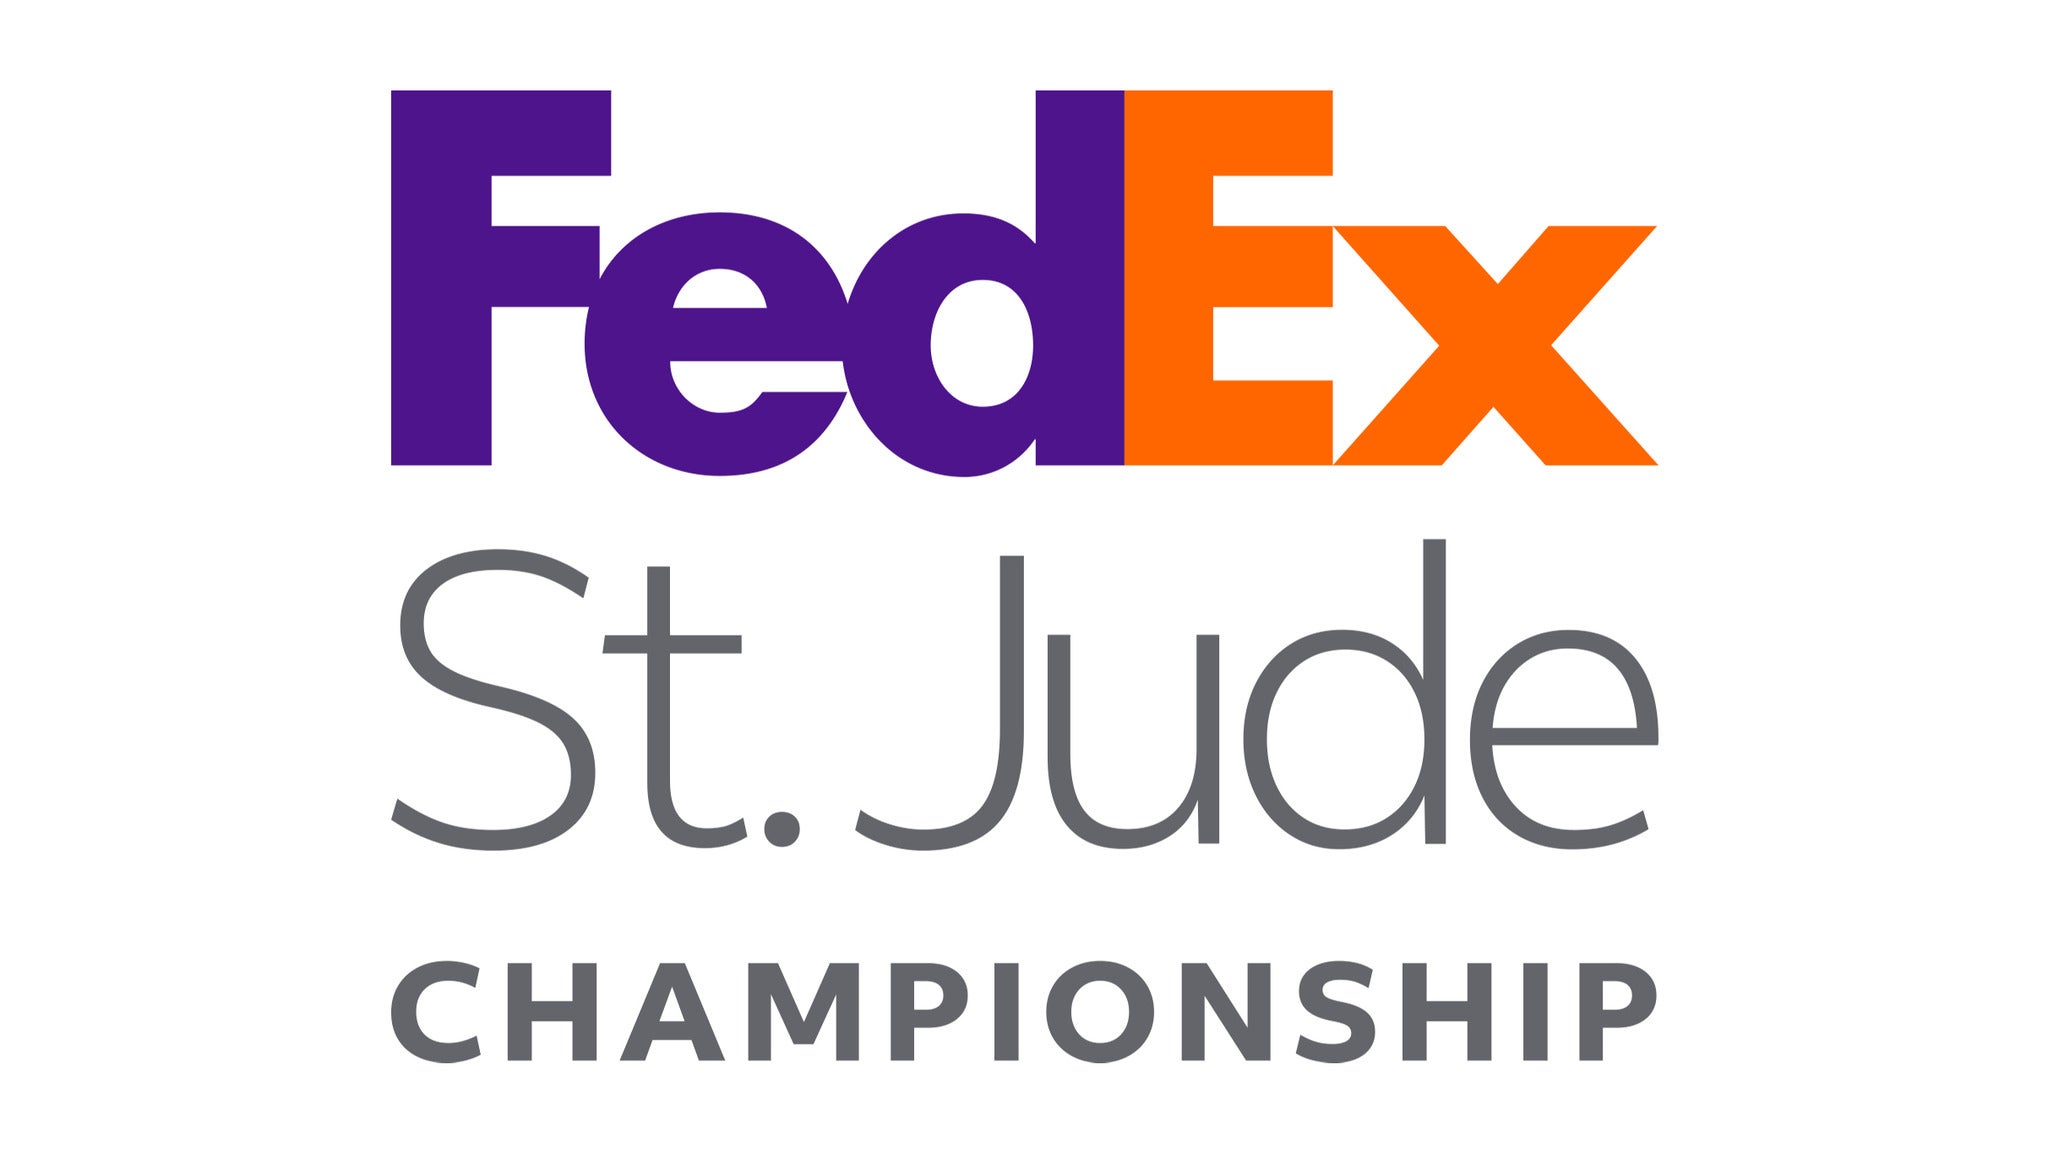 FedEx St. Jude Championship Sunday in Memphis promo photo for MasterCard presale offer code